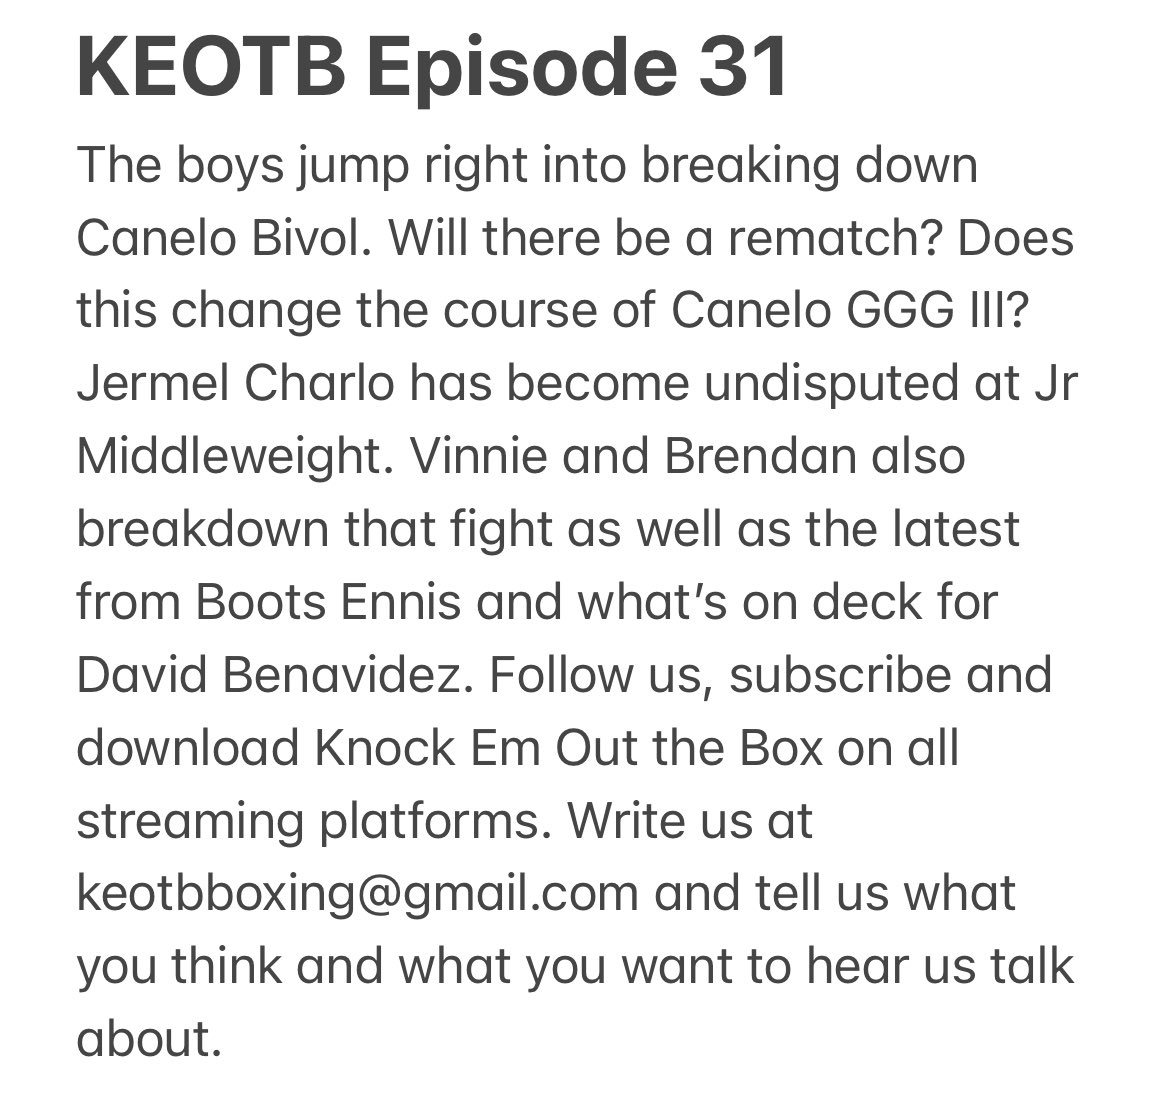 For your listening pleasure:

Find us on all streaming platforms.

Like, follow, review and subscribe. 

🥊🥊🥊🥊🥊🥊🥊🥊🥊🥊🥊
#boxing  #knockemoutthebox 

open.spotify.com/episode/0BK7p6…